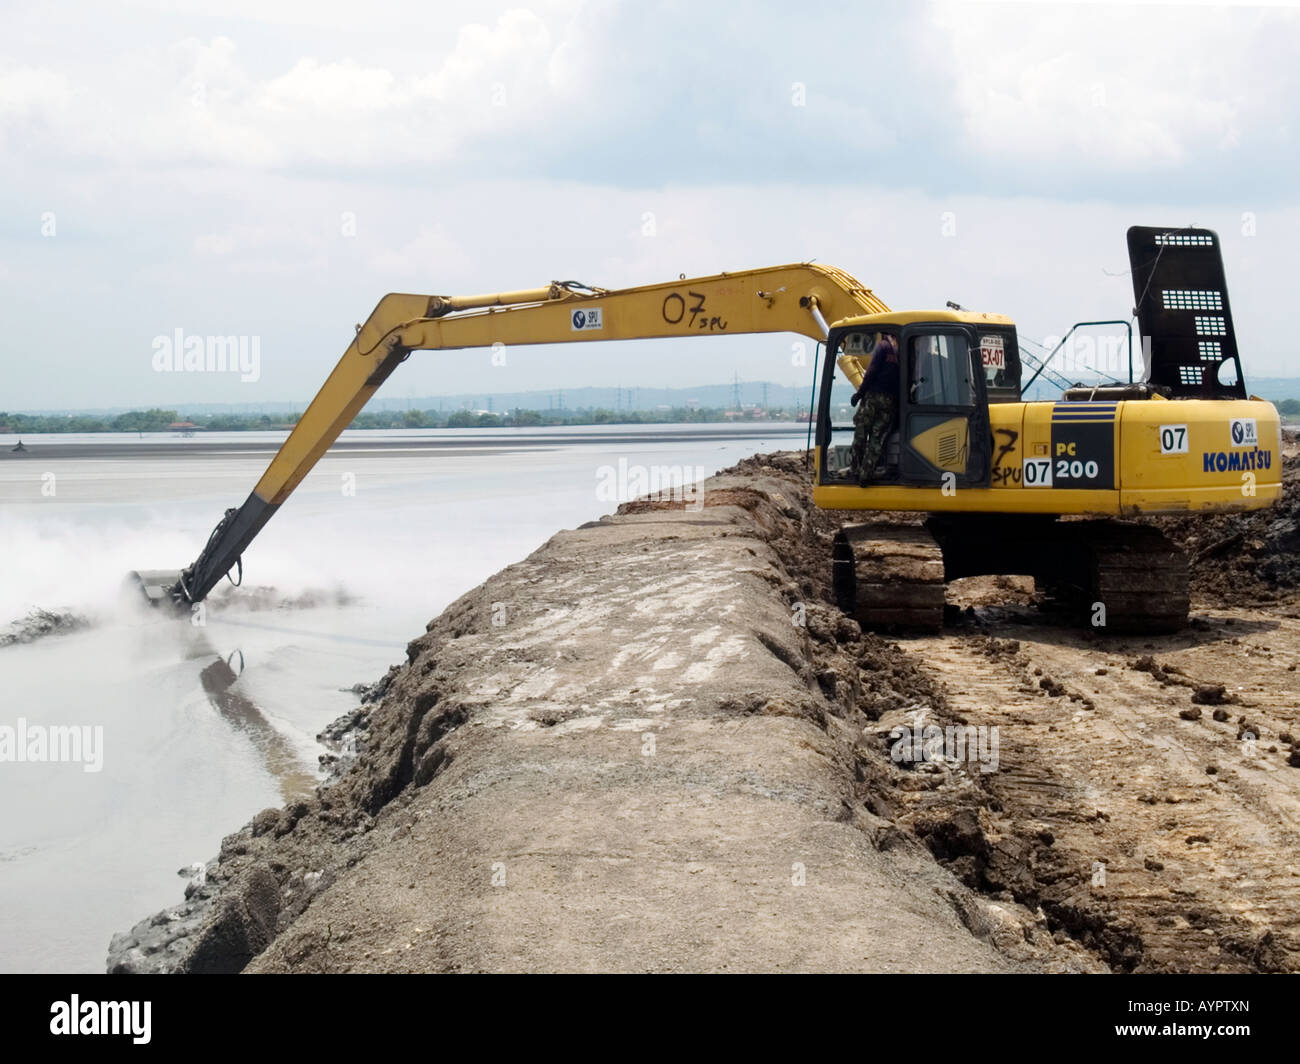 Dredger battles in vain to clear away the hot mud erupting from the ground in the disaster at Sidoarjo,East Java,Indonesia Stock Photo